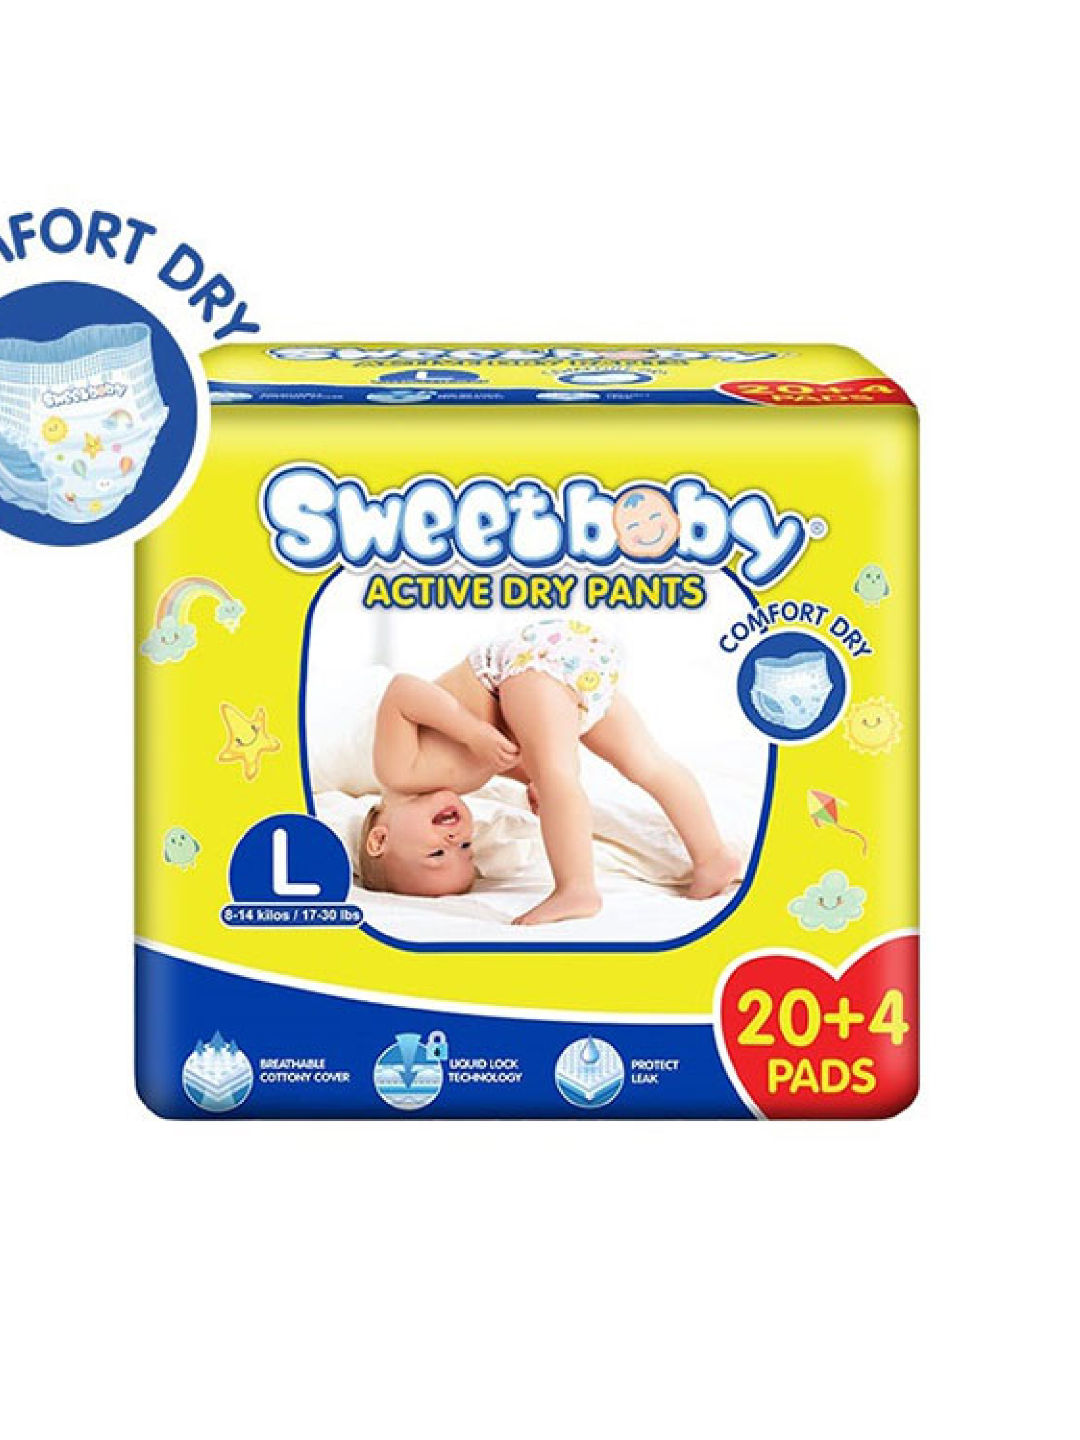 Sweetbaby Active Dry Pants Large (20+4)